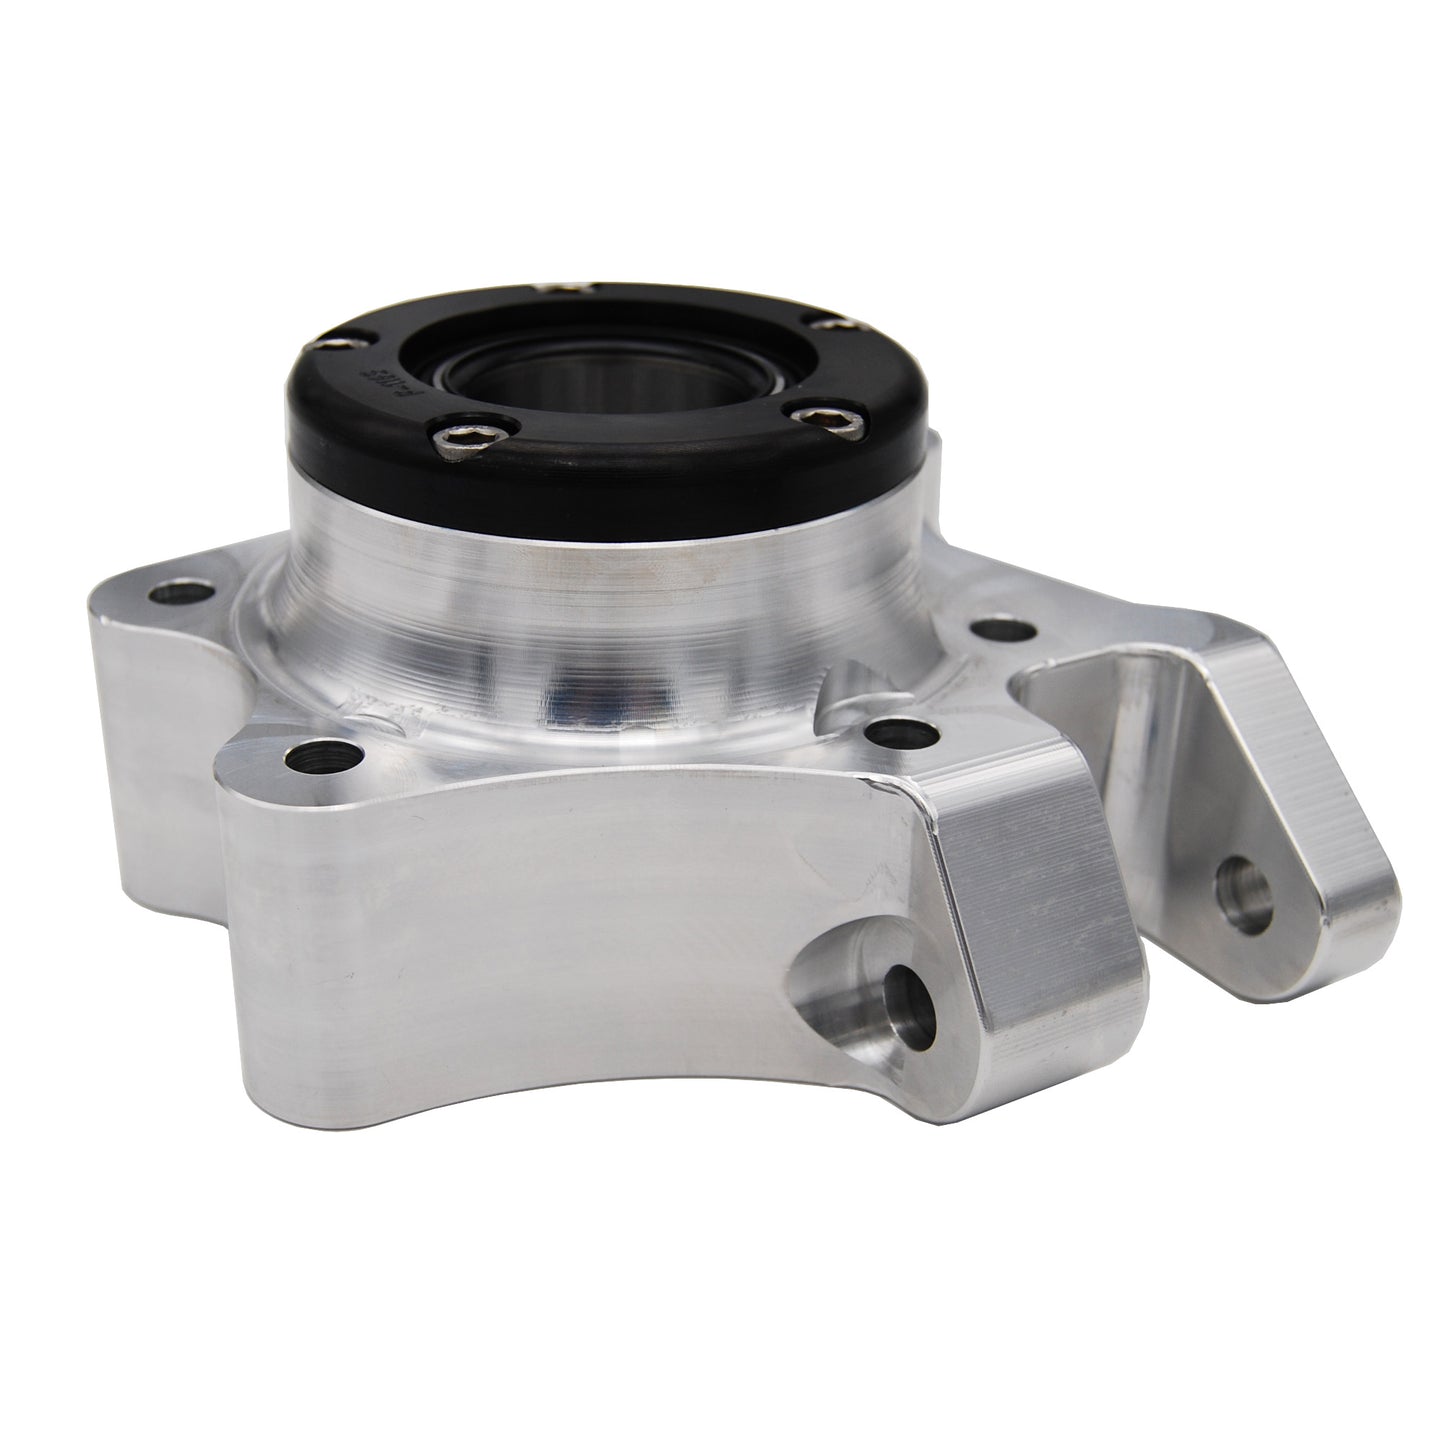 Capped RZR Turbo S Billet Rear Bearing Carrier/Spindle